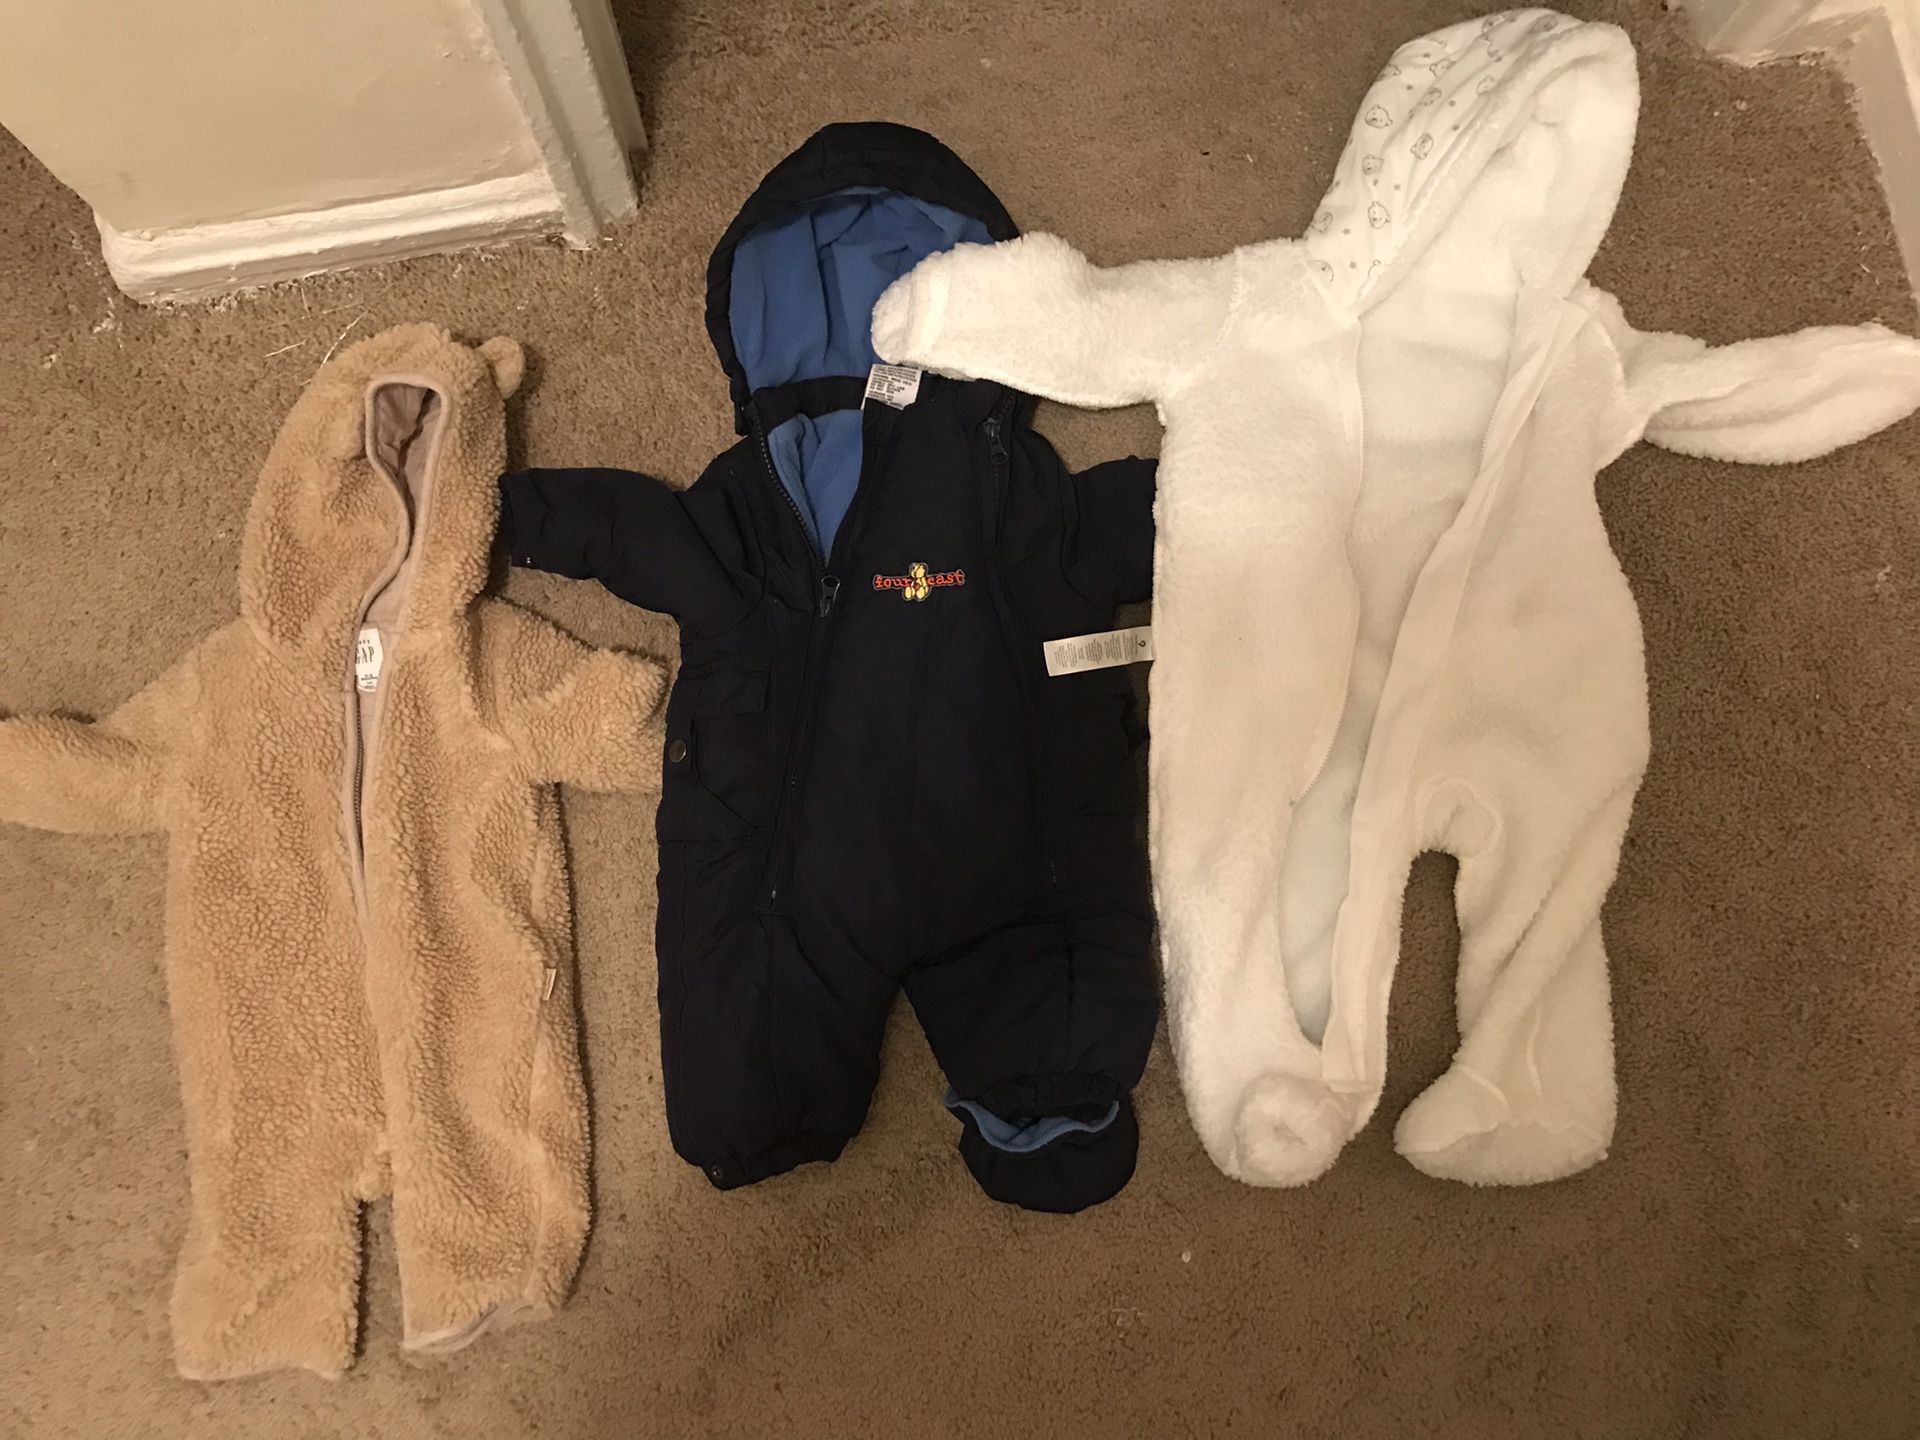 Baby Clothes, Baby Tub, Bassinet, Diaper Bags, Size 4 Diapers, Bottles, Baby Food, Rice Cereal, Bouncing Chair Also Sings And Vibrate, Baby Snow Suits